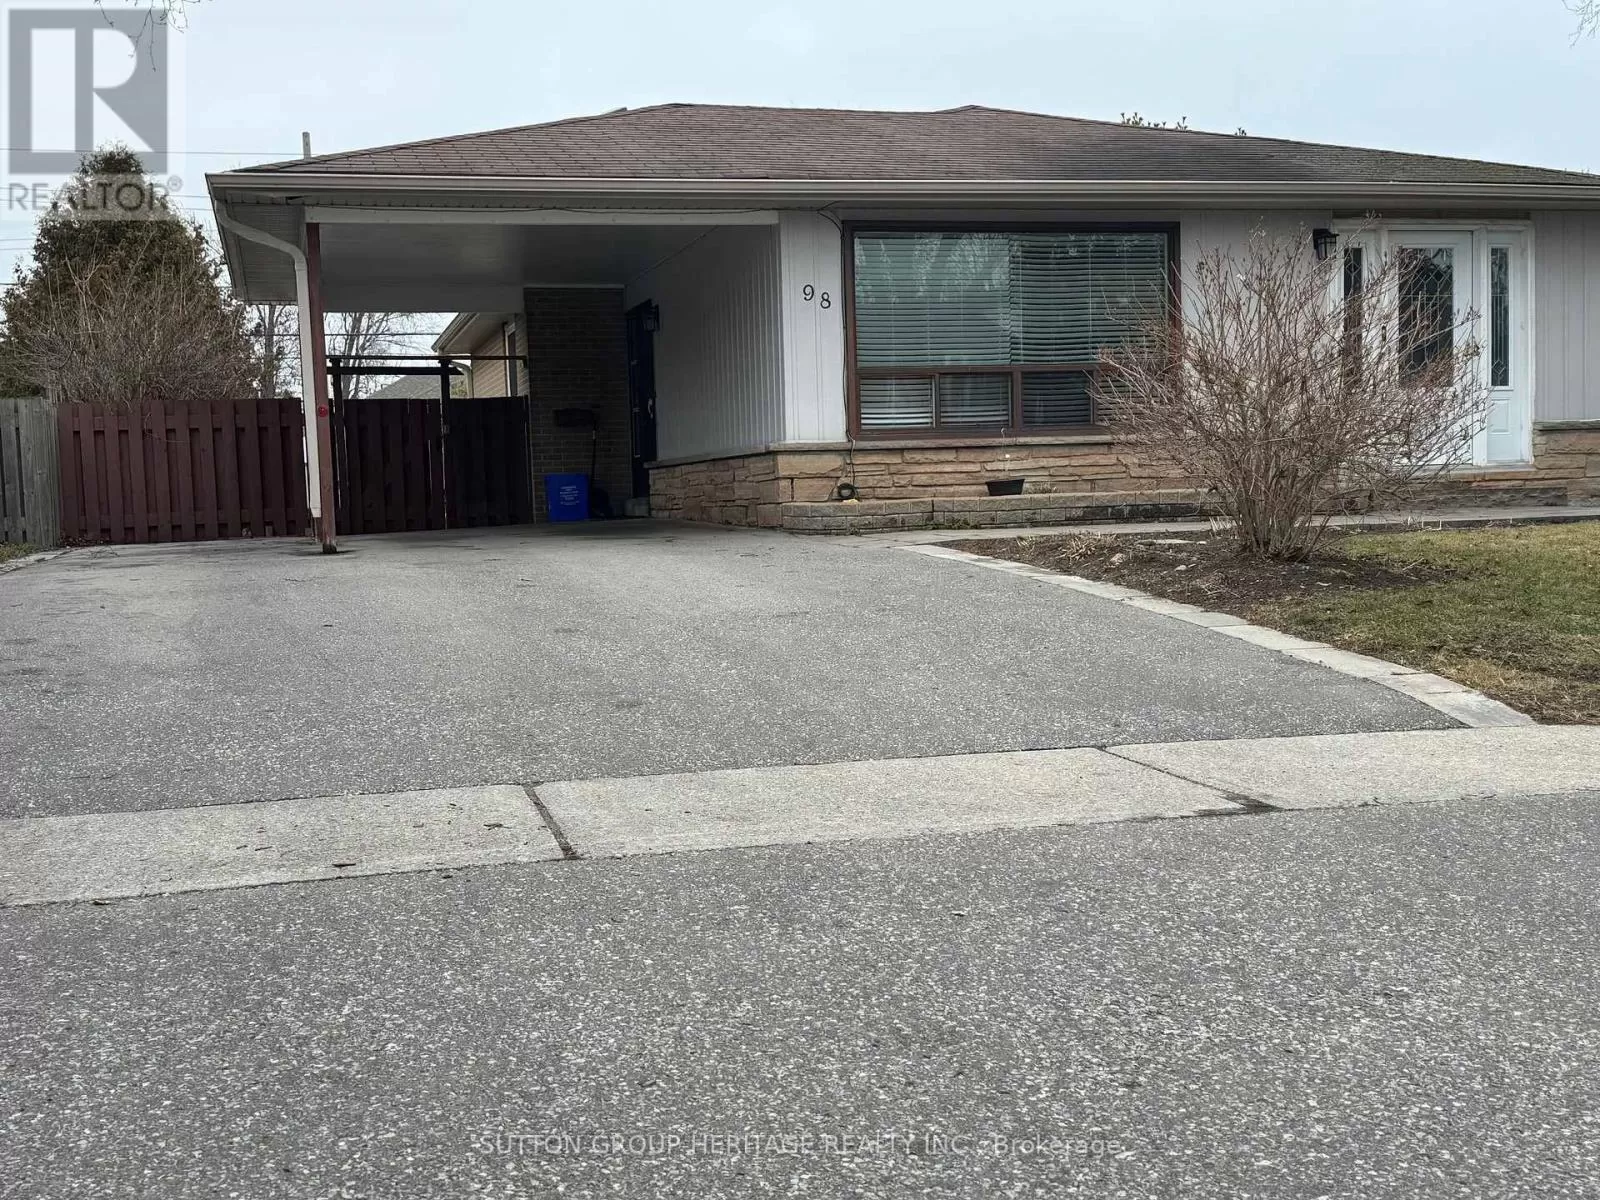 House for rent: 98 Gregory Rd, Ajax, Ontario L1S 3B4